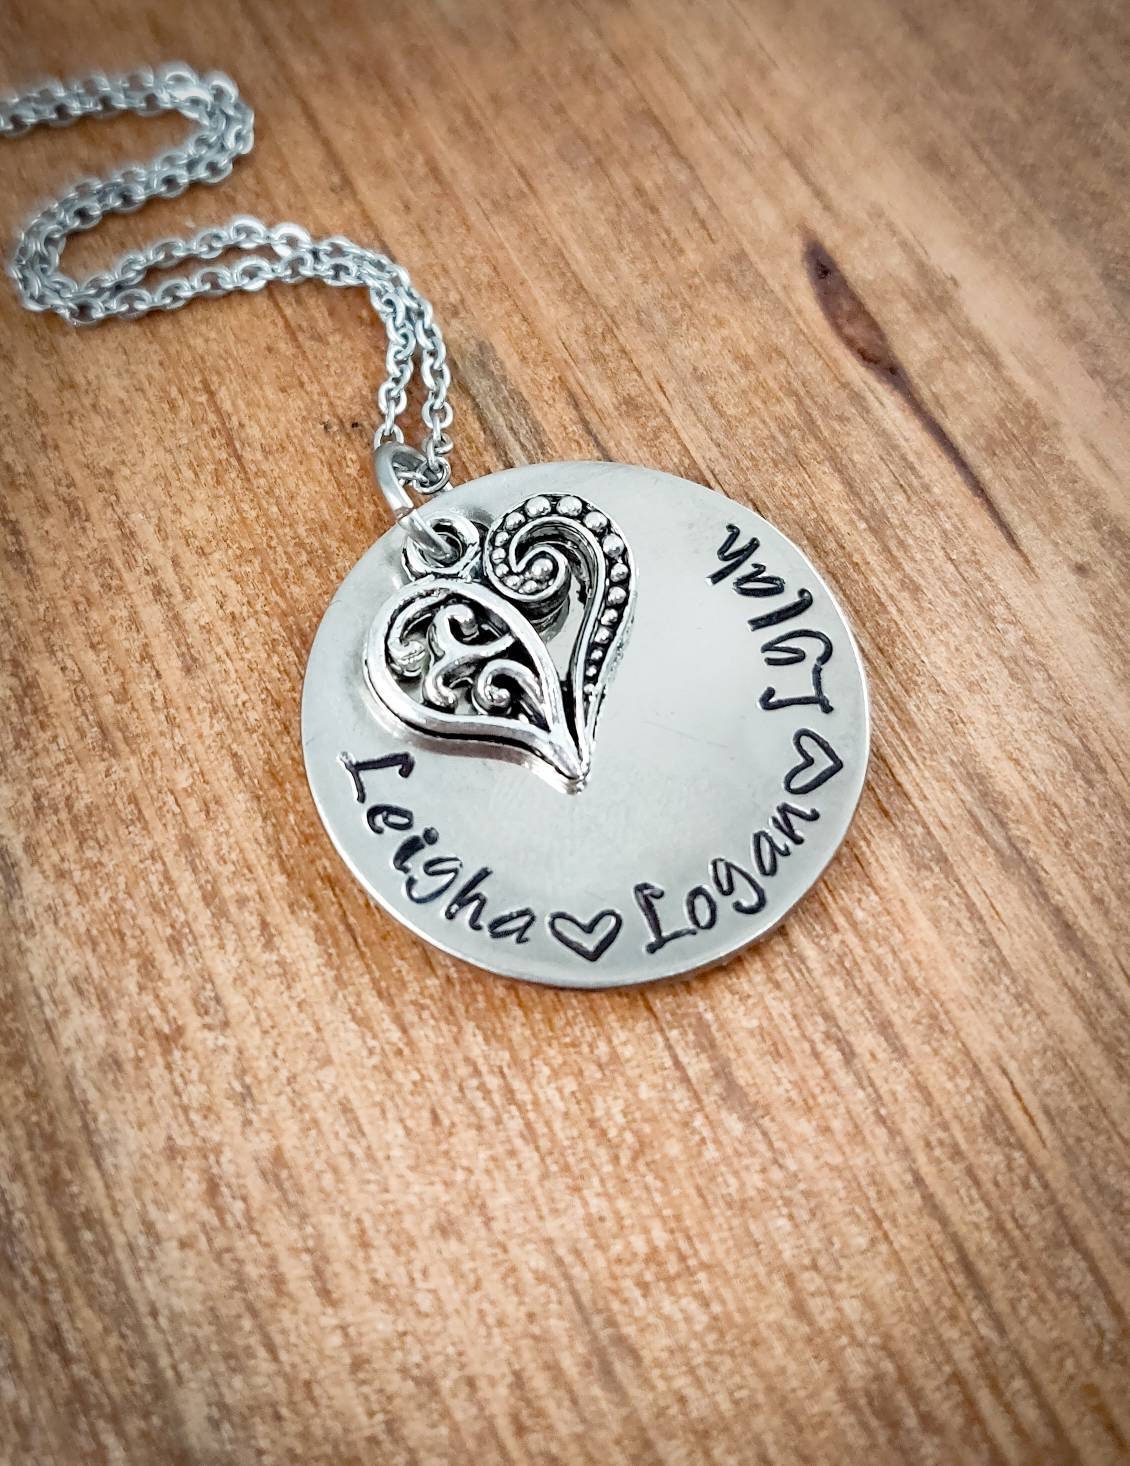 Personalized Mom Necklace, Mom Necklace, Nana Necklace, Grandma Jewelry, Grandma Necklace, Grandkids Name Necklace, Kid's Names Necklace